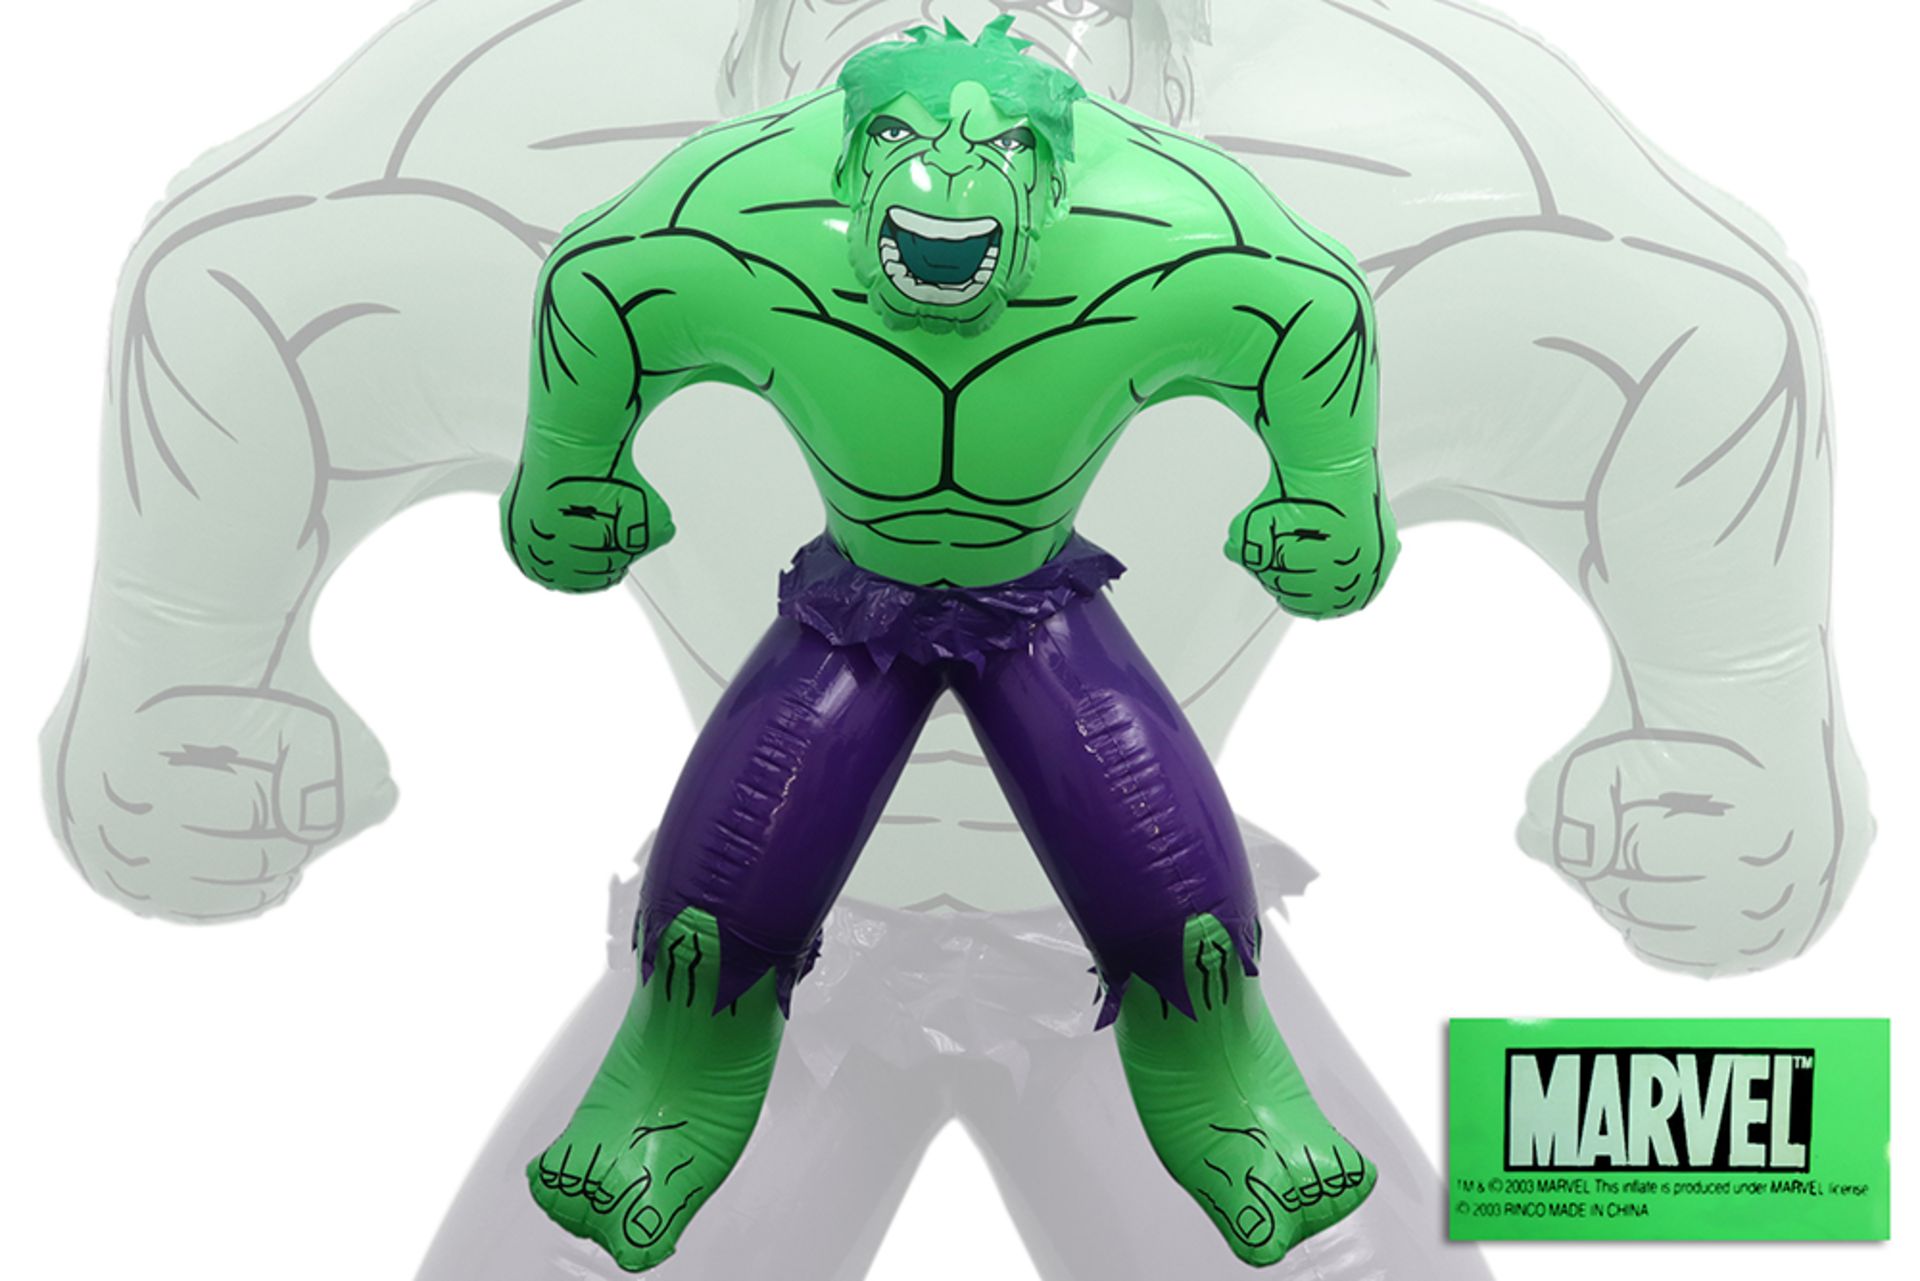 eff Koons "The Hulk" (inflatable) plastic sculpture - edition by Marvel dd 2003 these sculptures